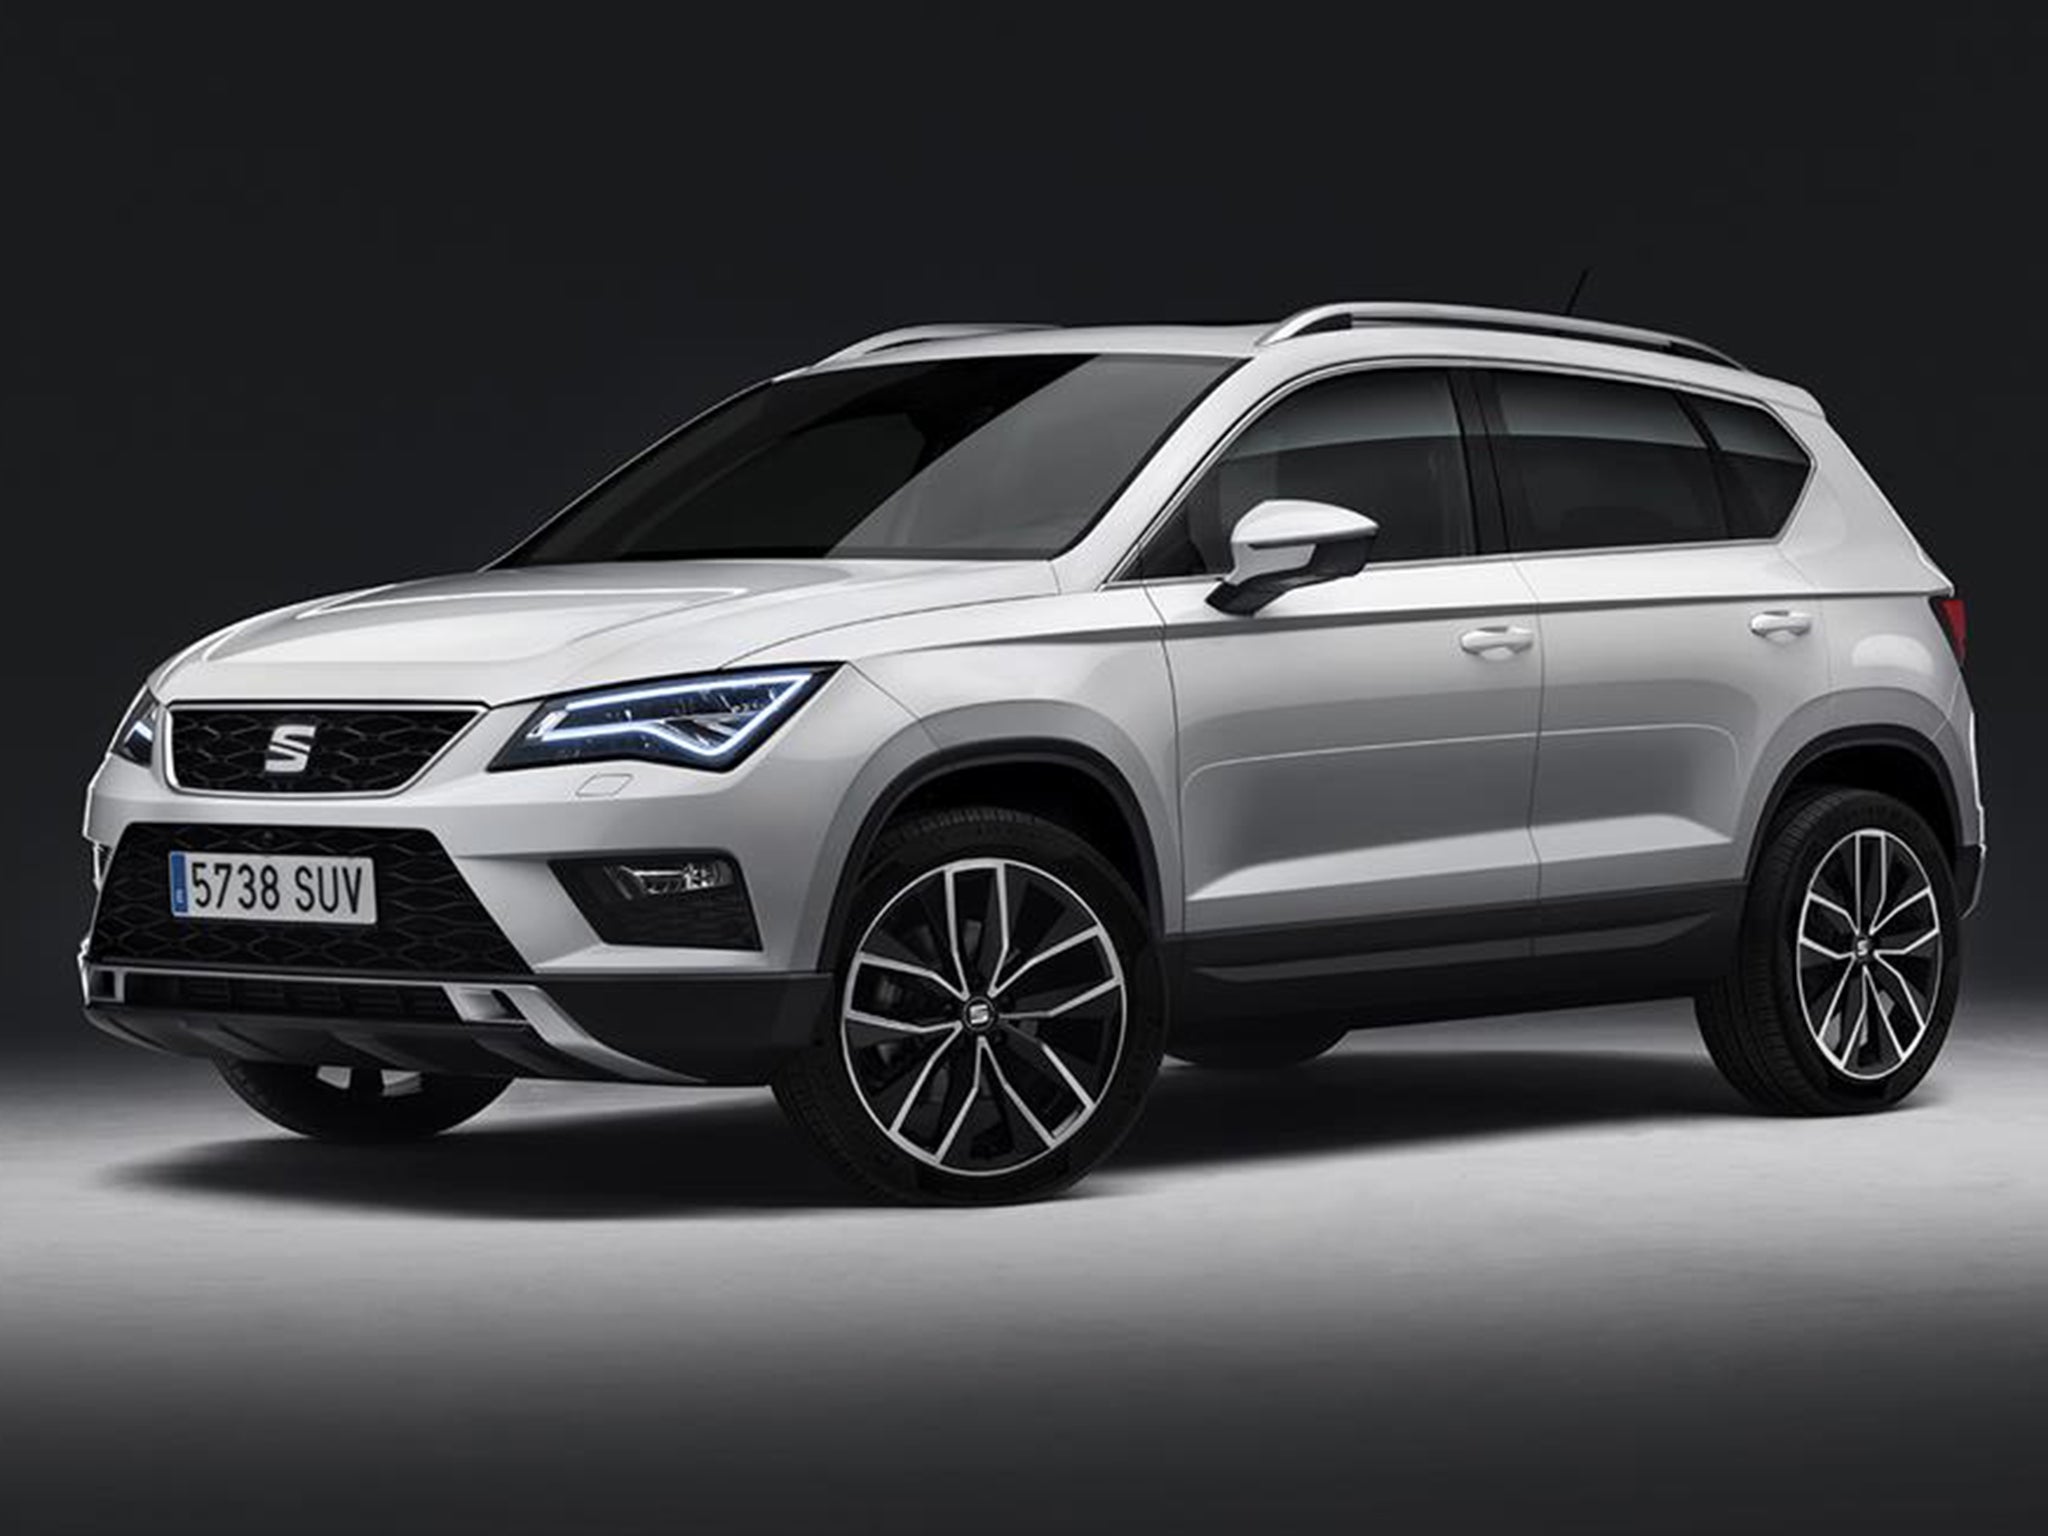 The Ateca will be front-driven as standard